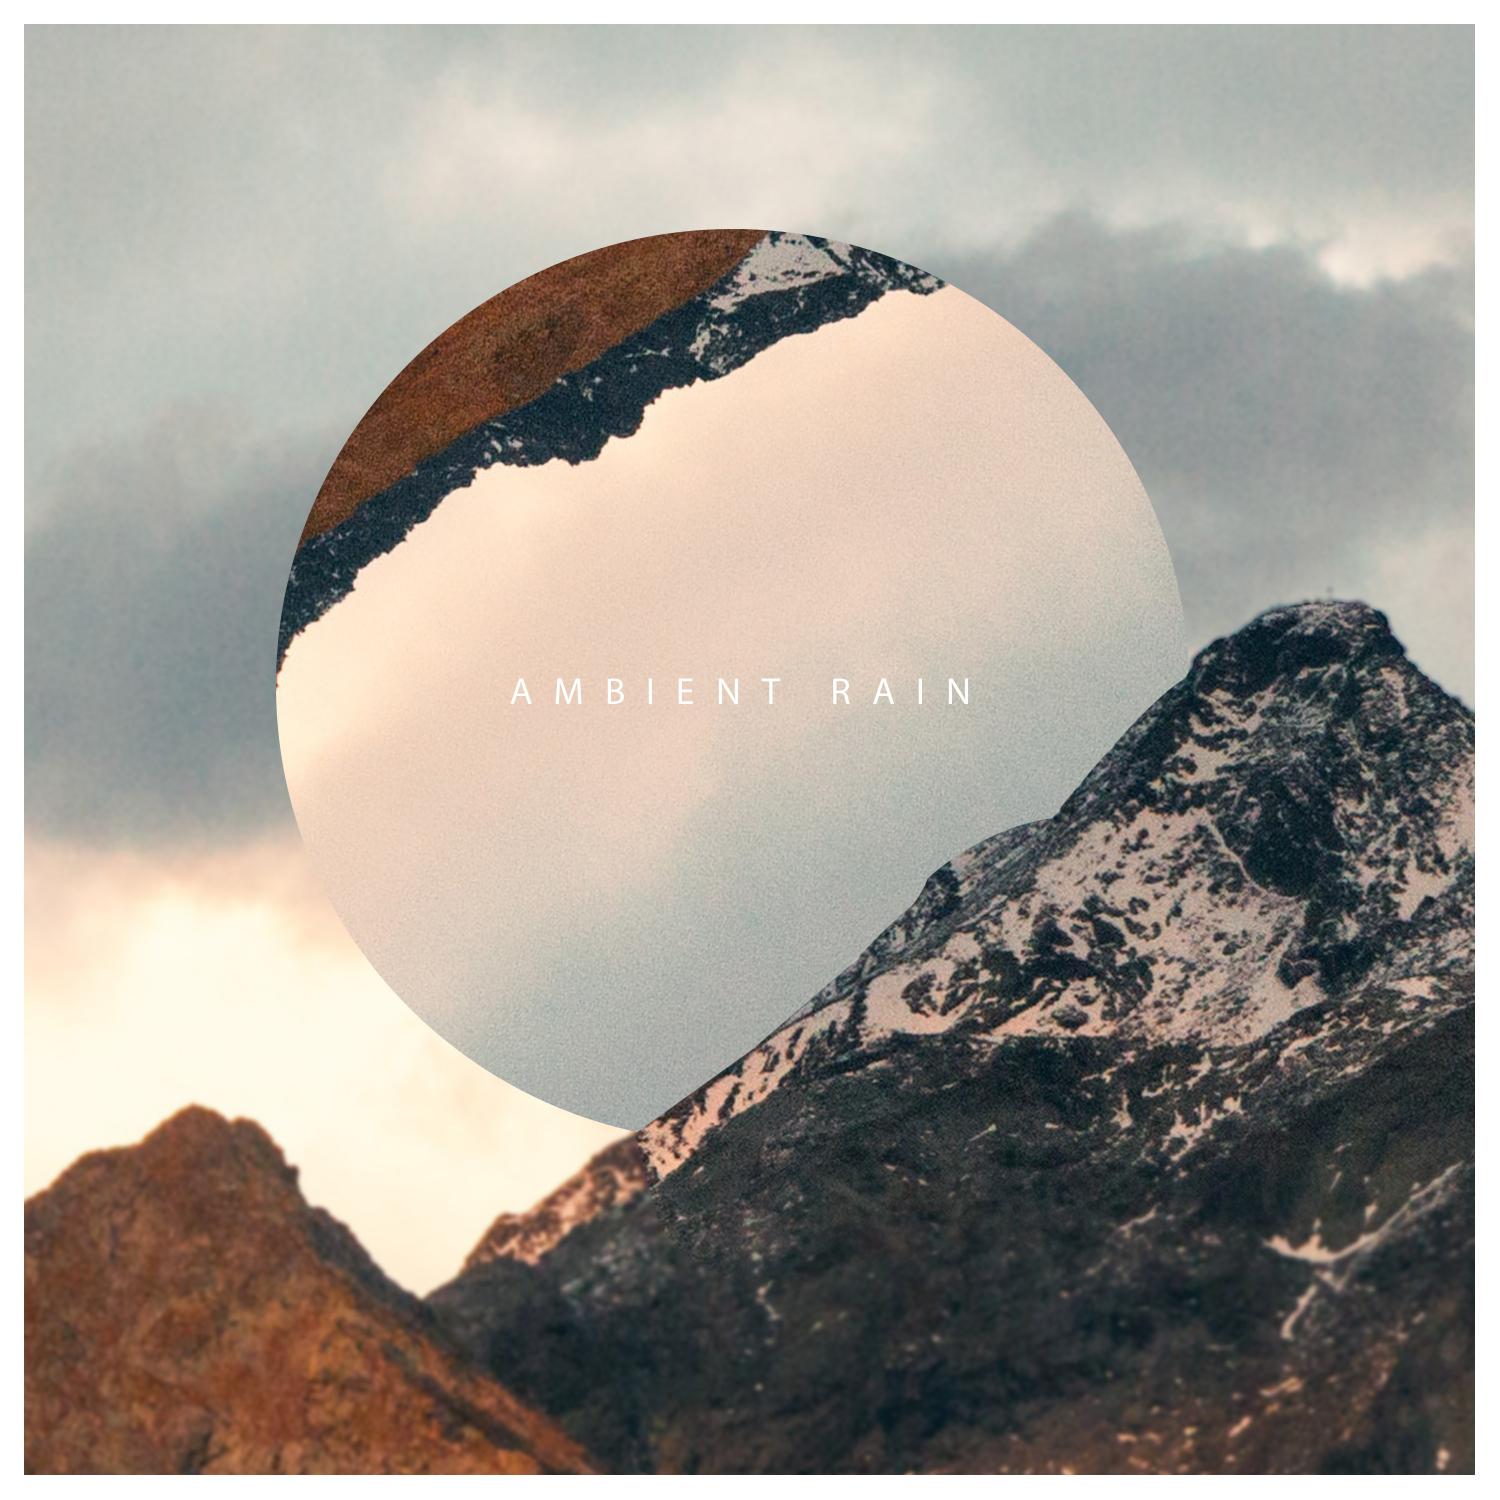 17 Ambient Rain Sounds for Sleep and Relaxation